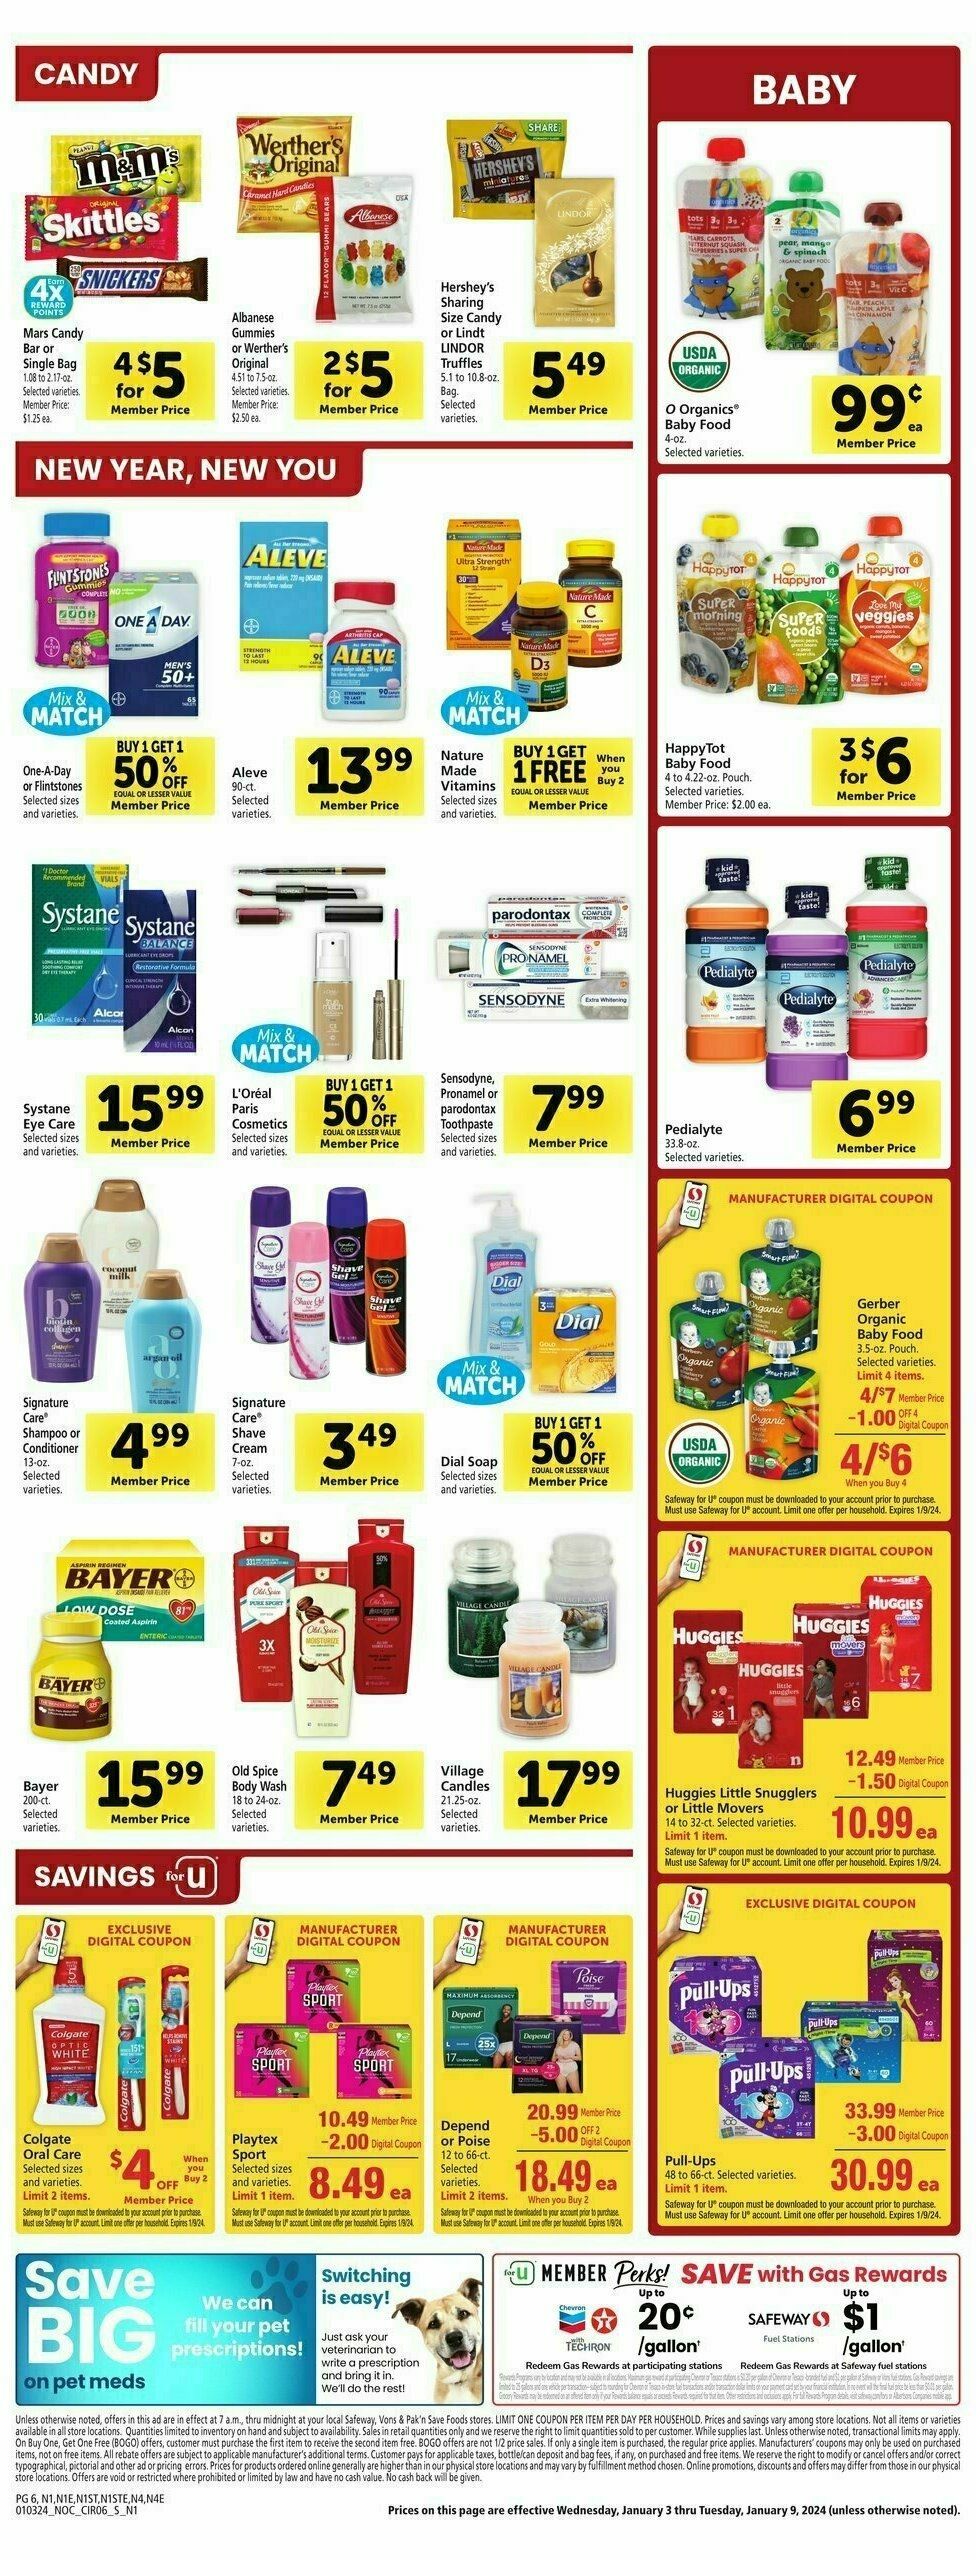 Safeway Weekly Ad from January 3